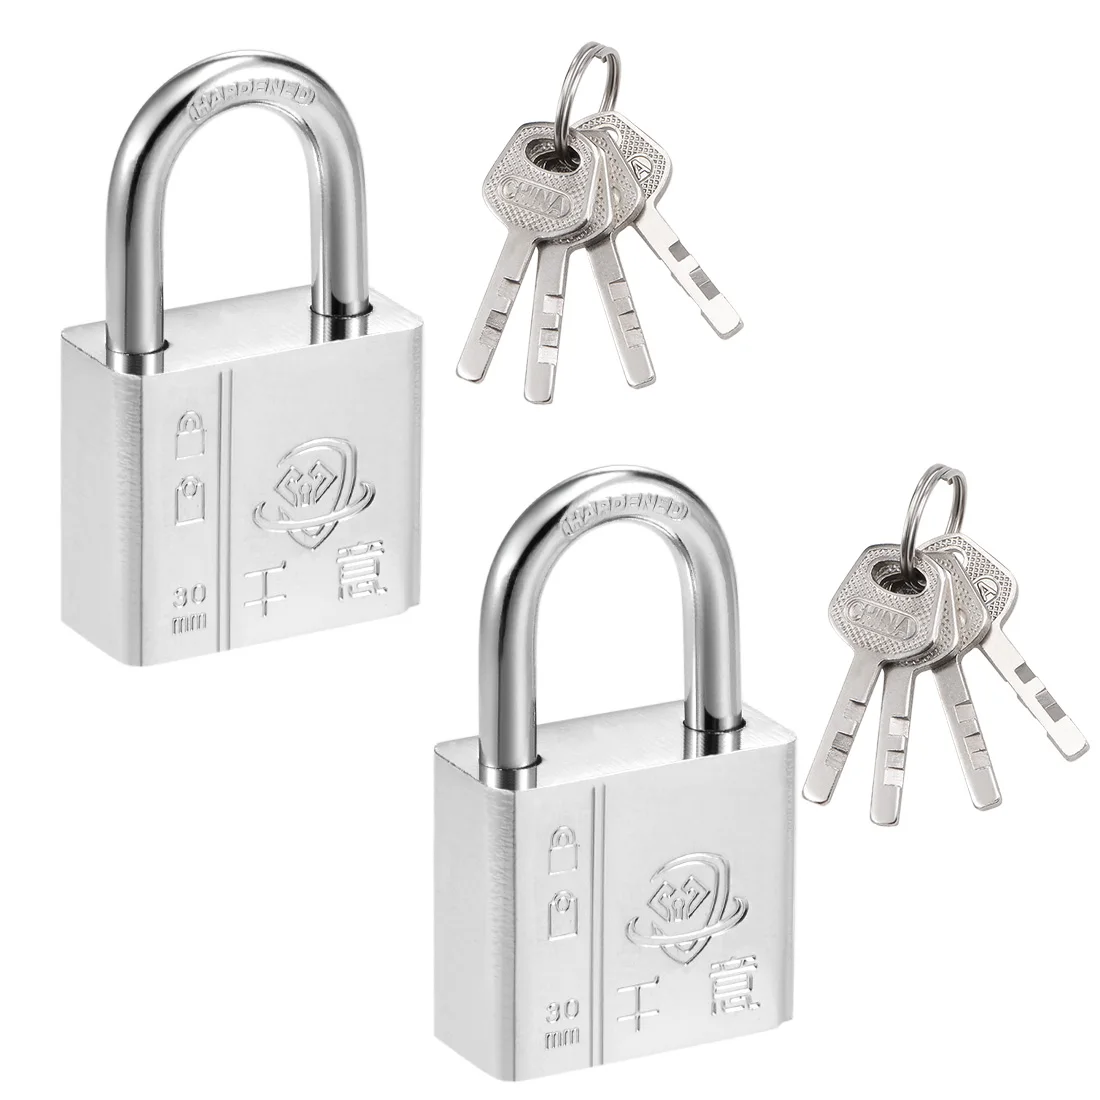 

uxcell Steel Padlock, Keyed Different, 30mm Wide Chrome Finish Harden Shackle, 2Pcs